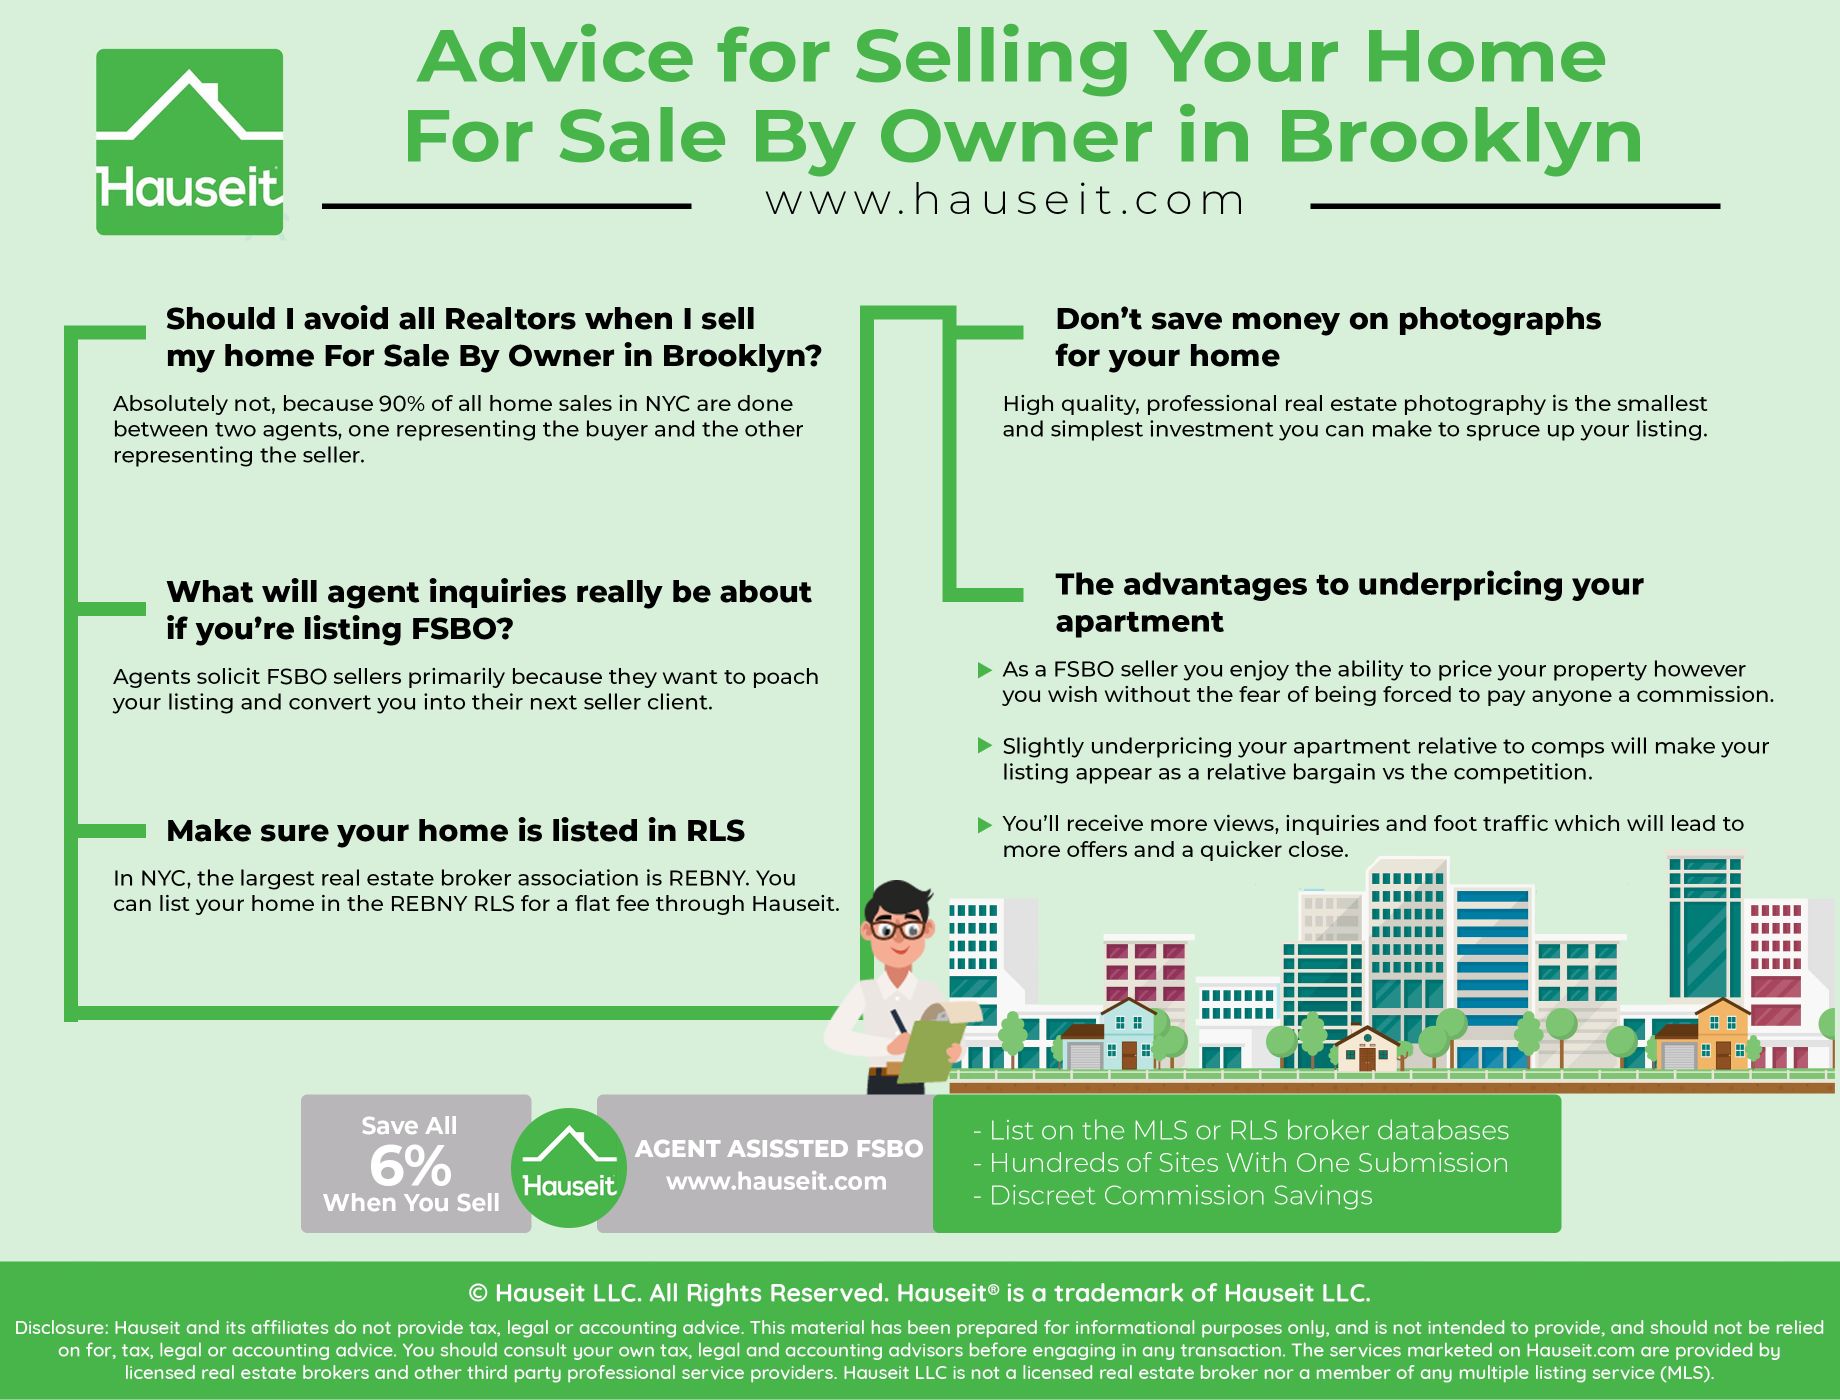 Looking for advice before you decide to sell your most valuable asset For Sale By Owner in Brooklyn? Make sure you understand the market in Brooklyn first.